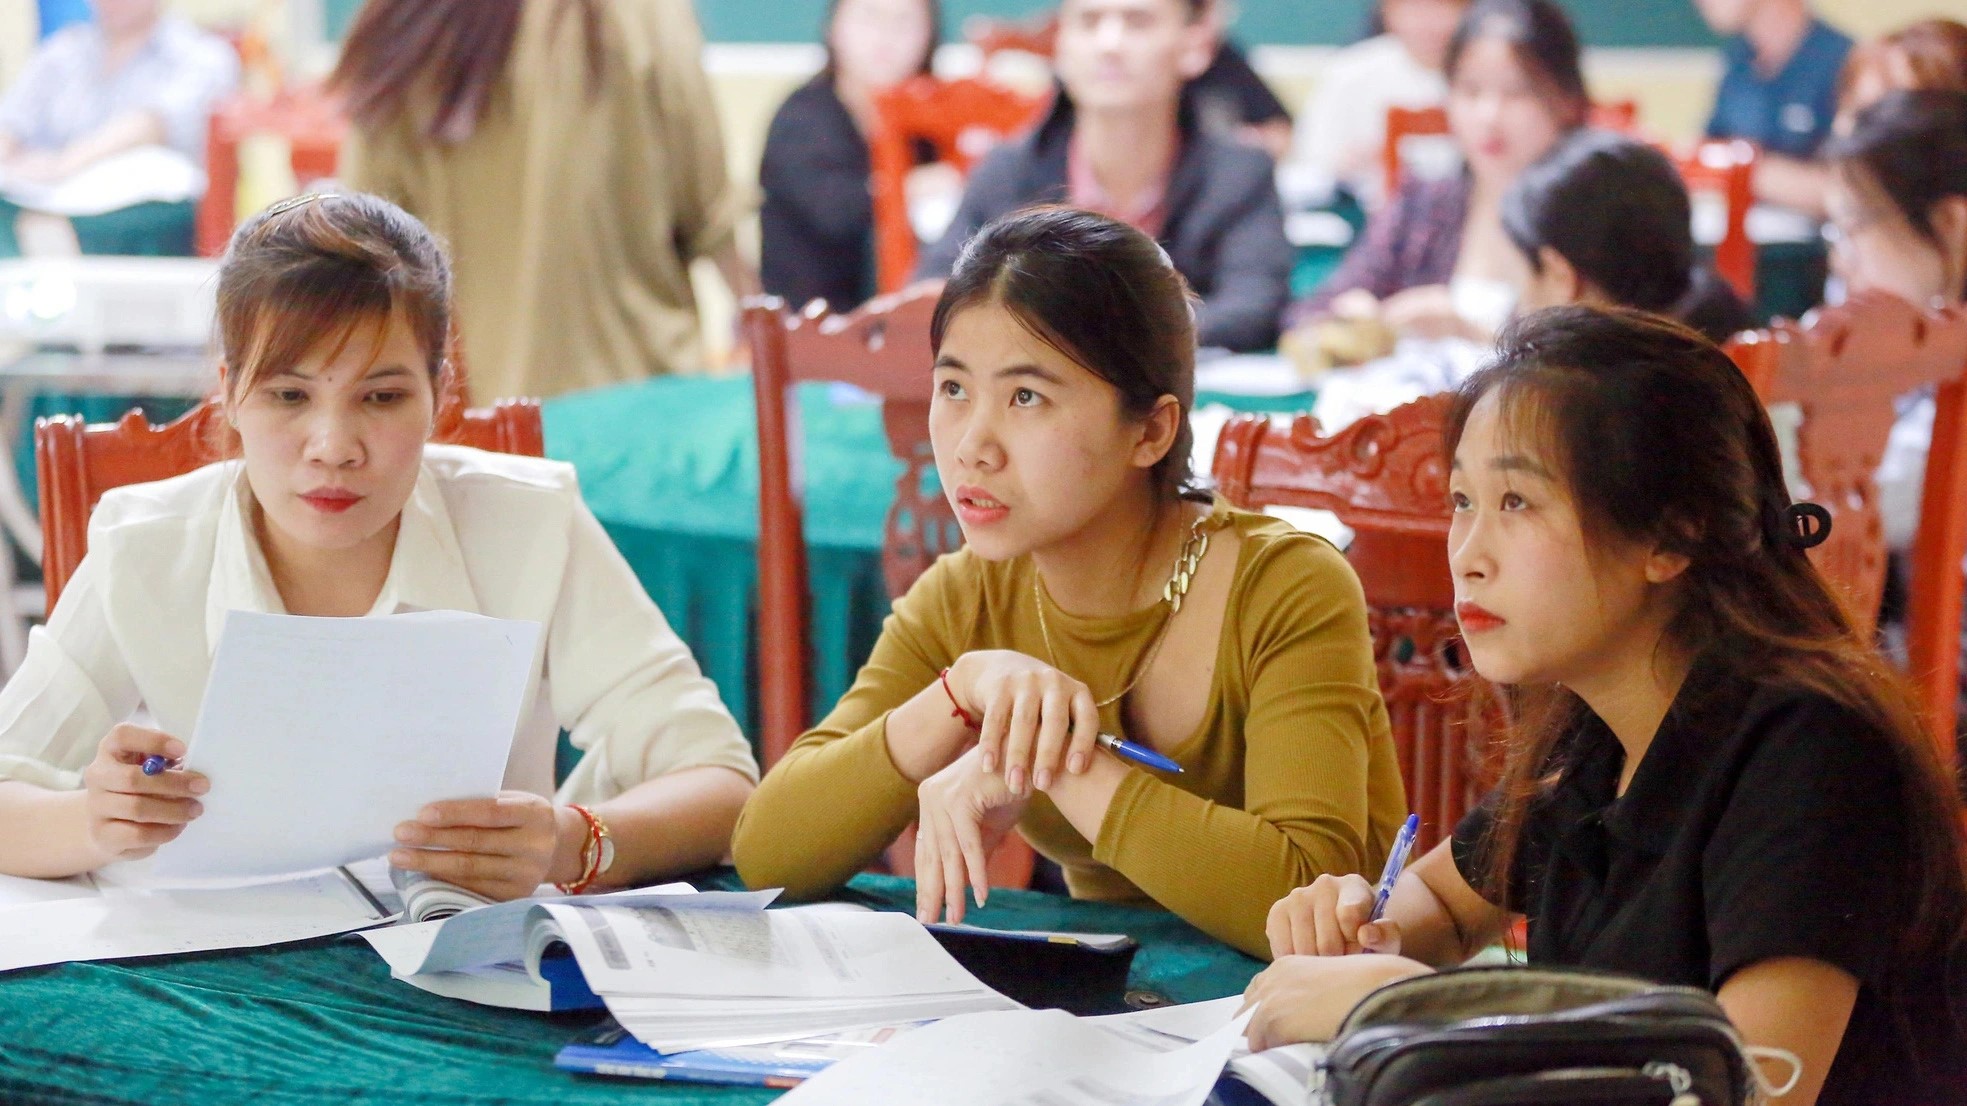 Embracing education: Vietnamese workers take free foreign language classes after work